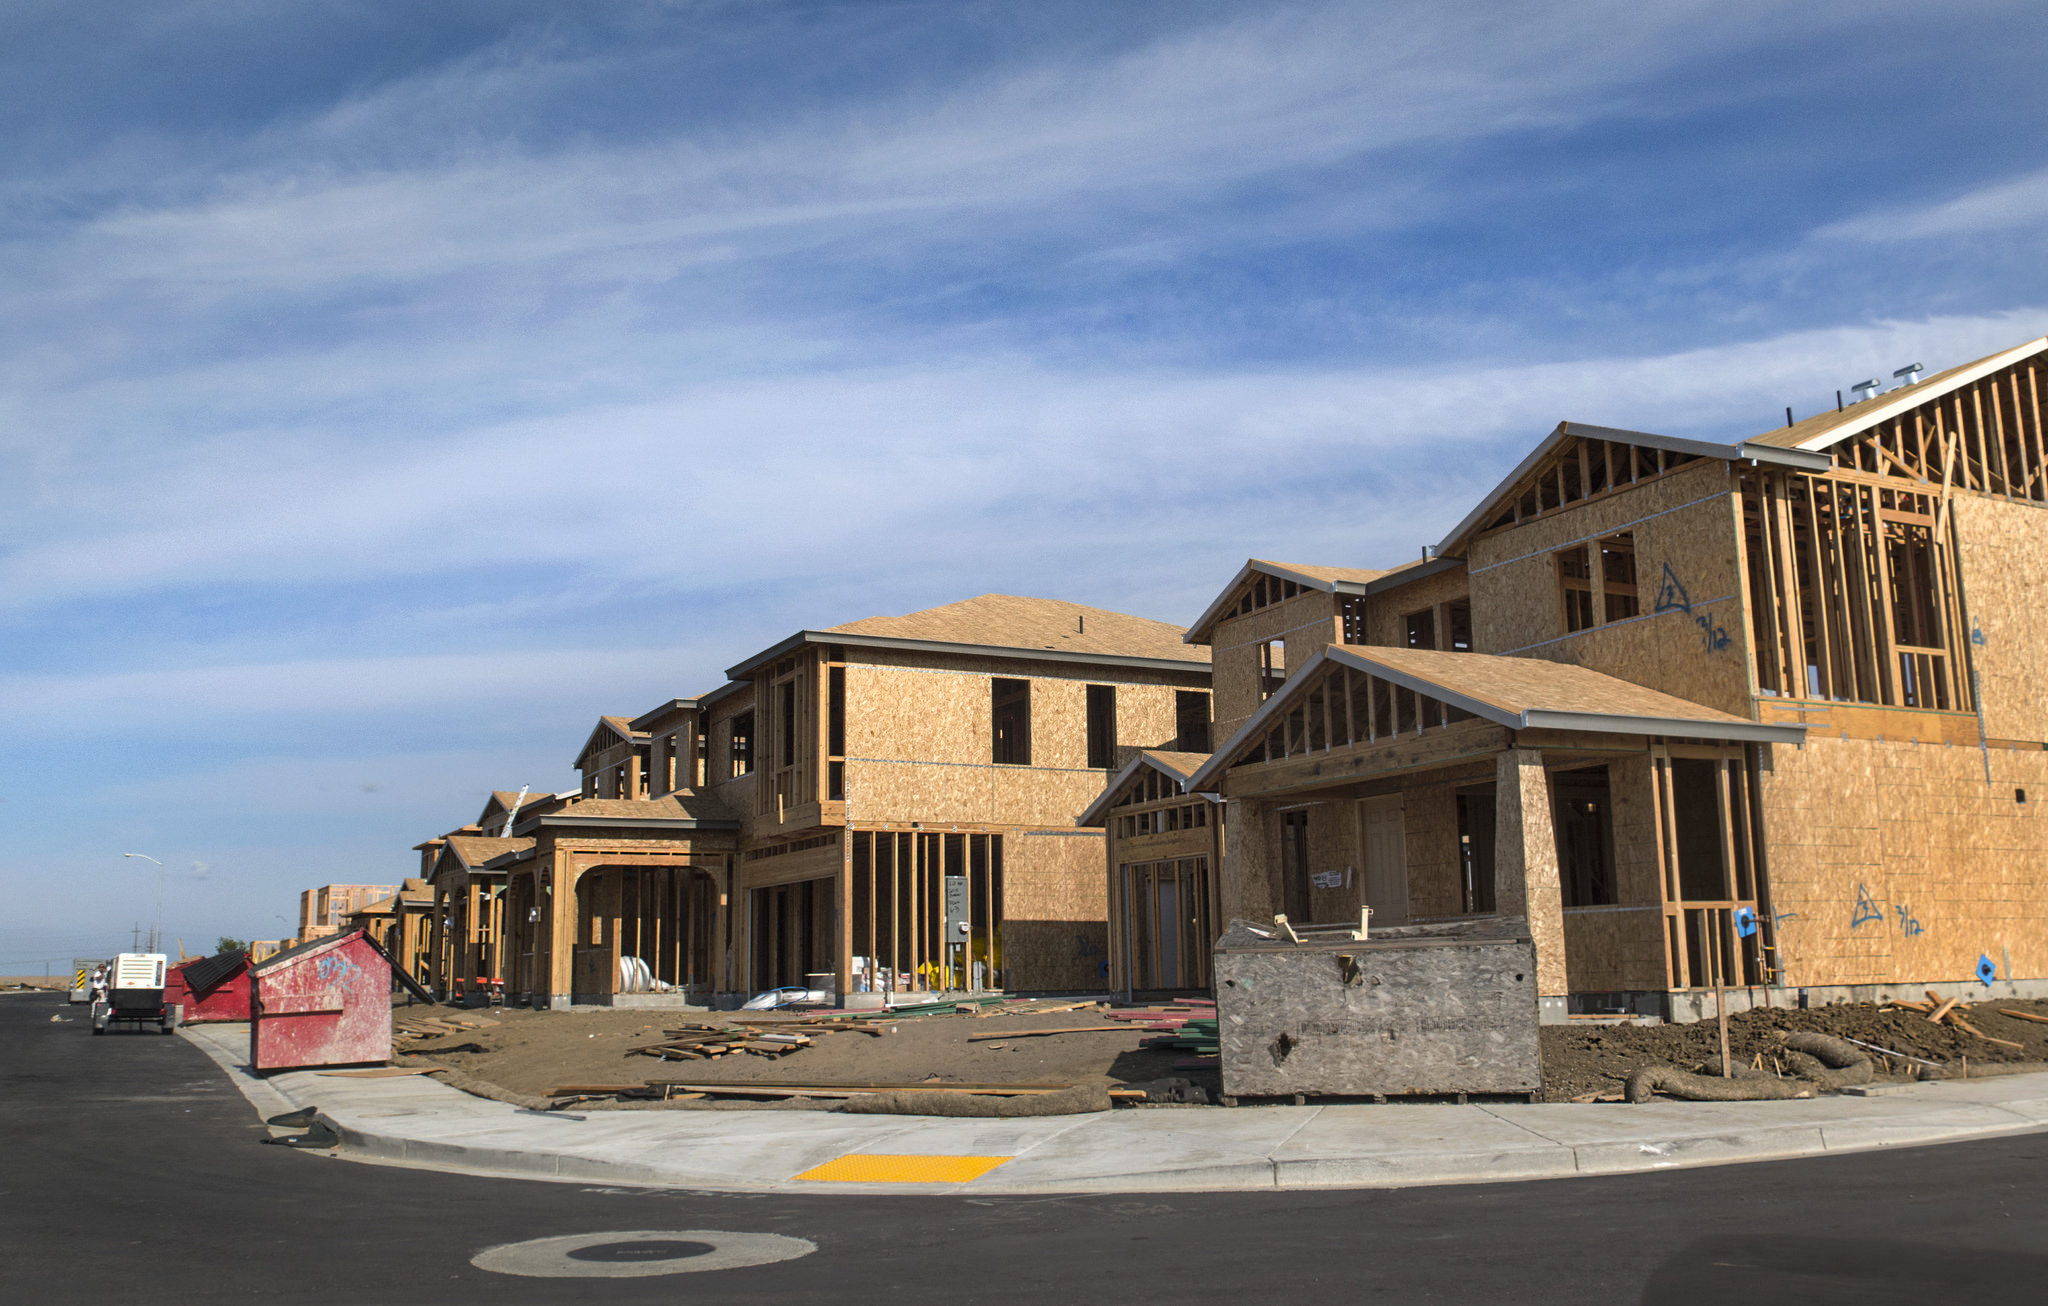 ABC, AIA & NAHB: Residential and nonresidential construction growth expected in 2016